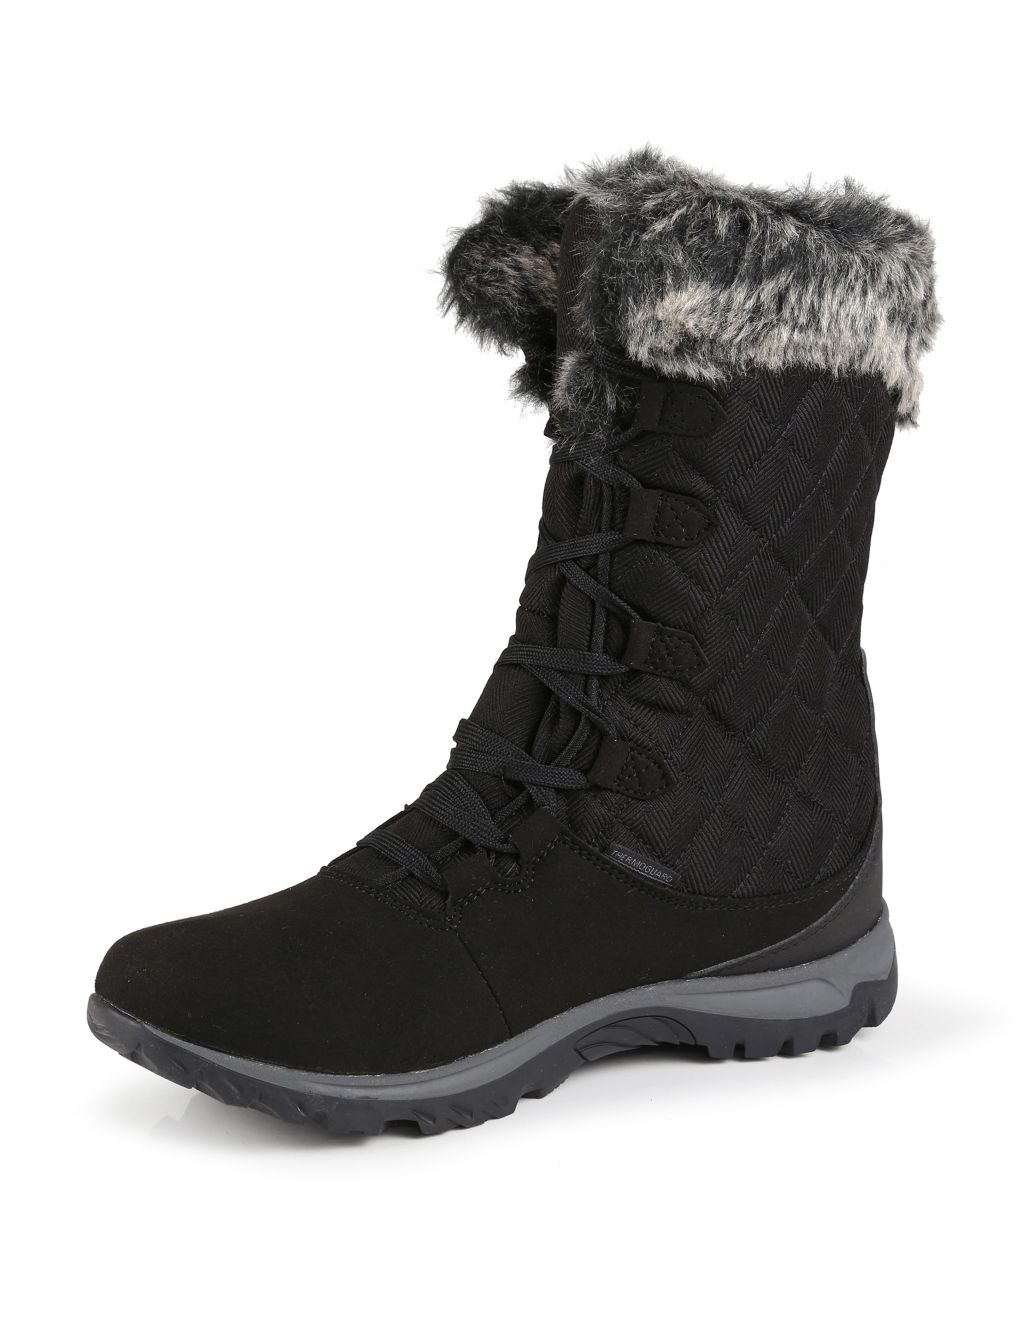 Lady Newley Thermo Winter Boots image 3